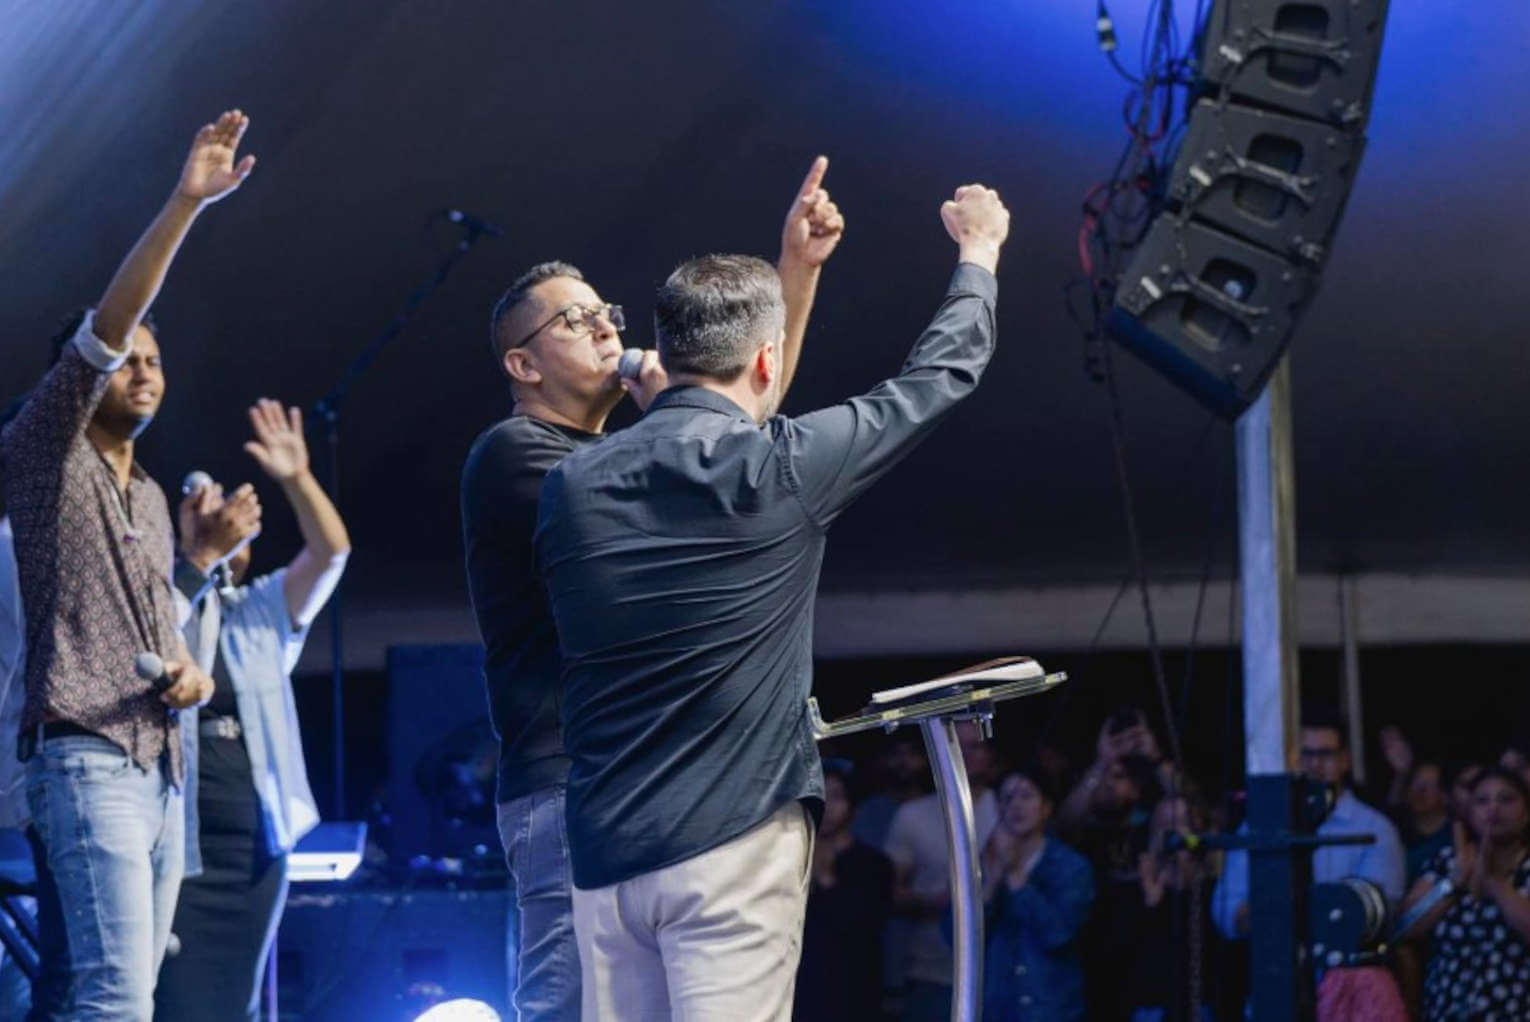 Revival Hits US Border With 9,000 Having ‘Experience With the Lord’